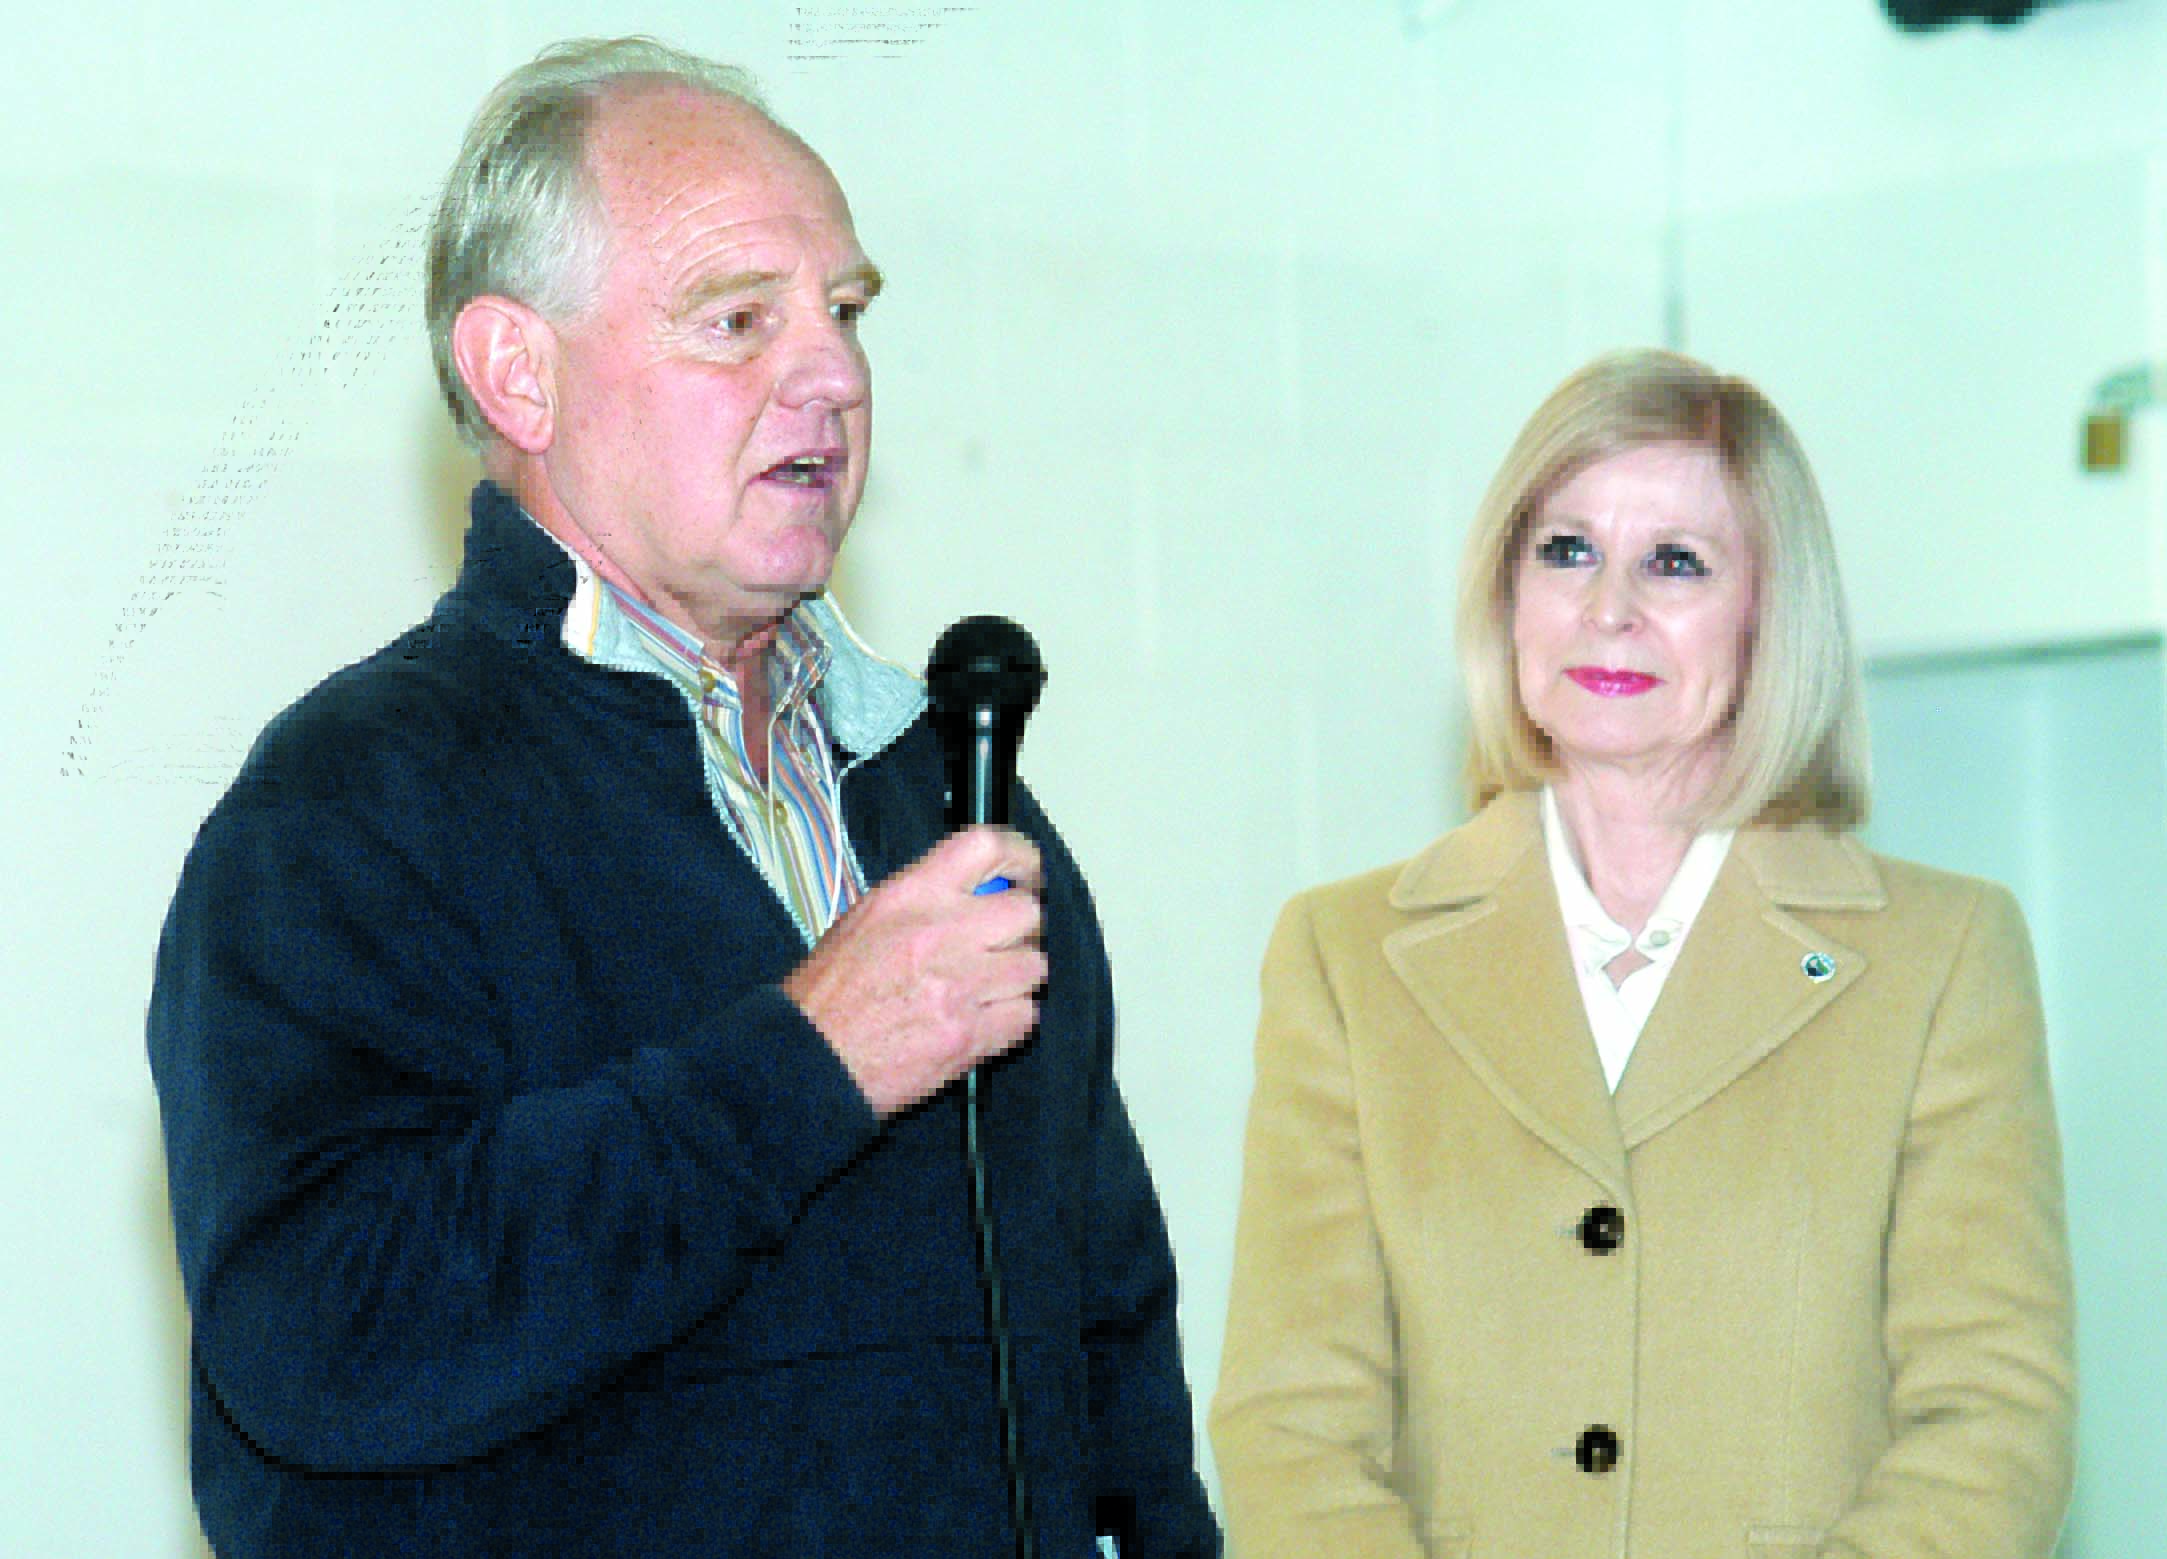 Paul Cronauer speaks after receiving honors from Port Angeles Mayor Cherie Kidd